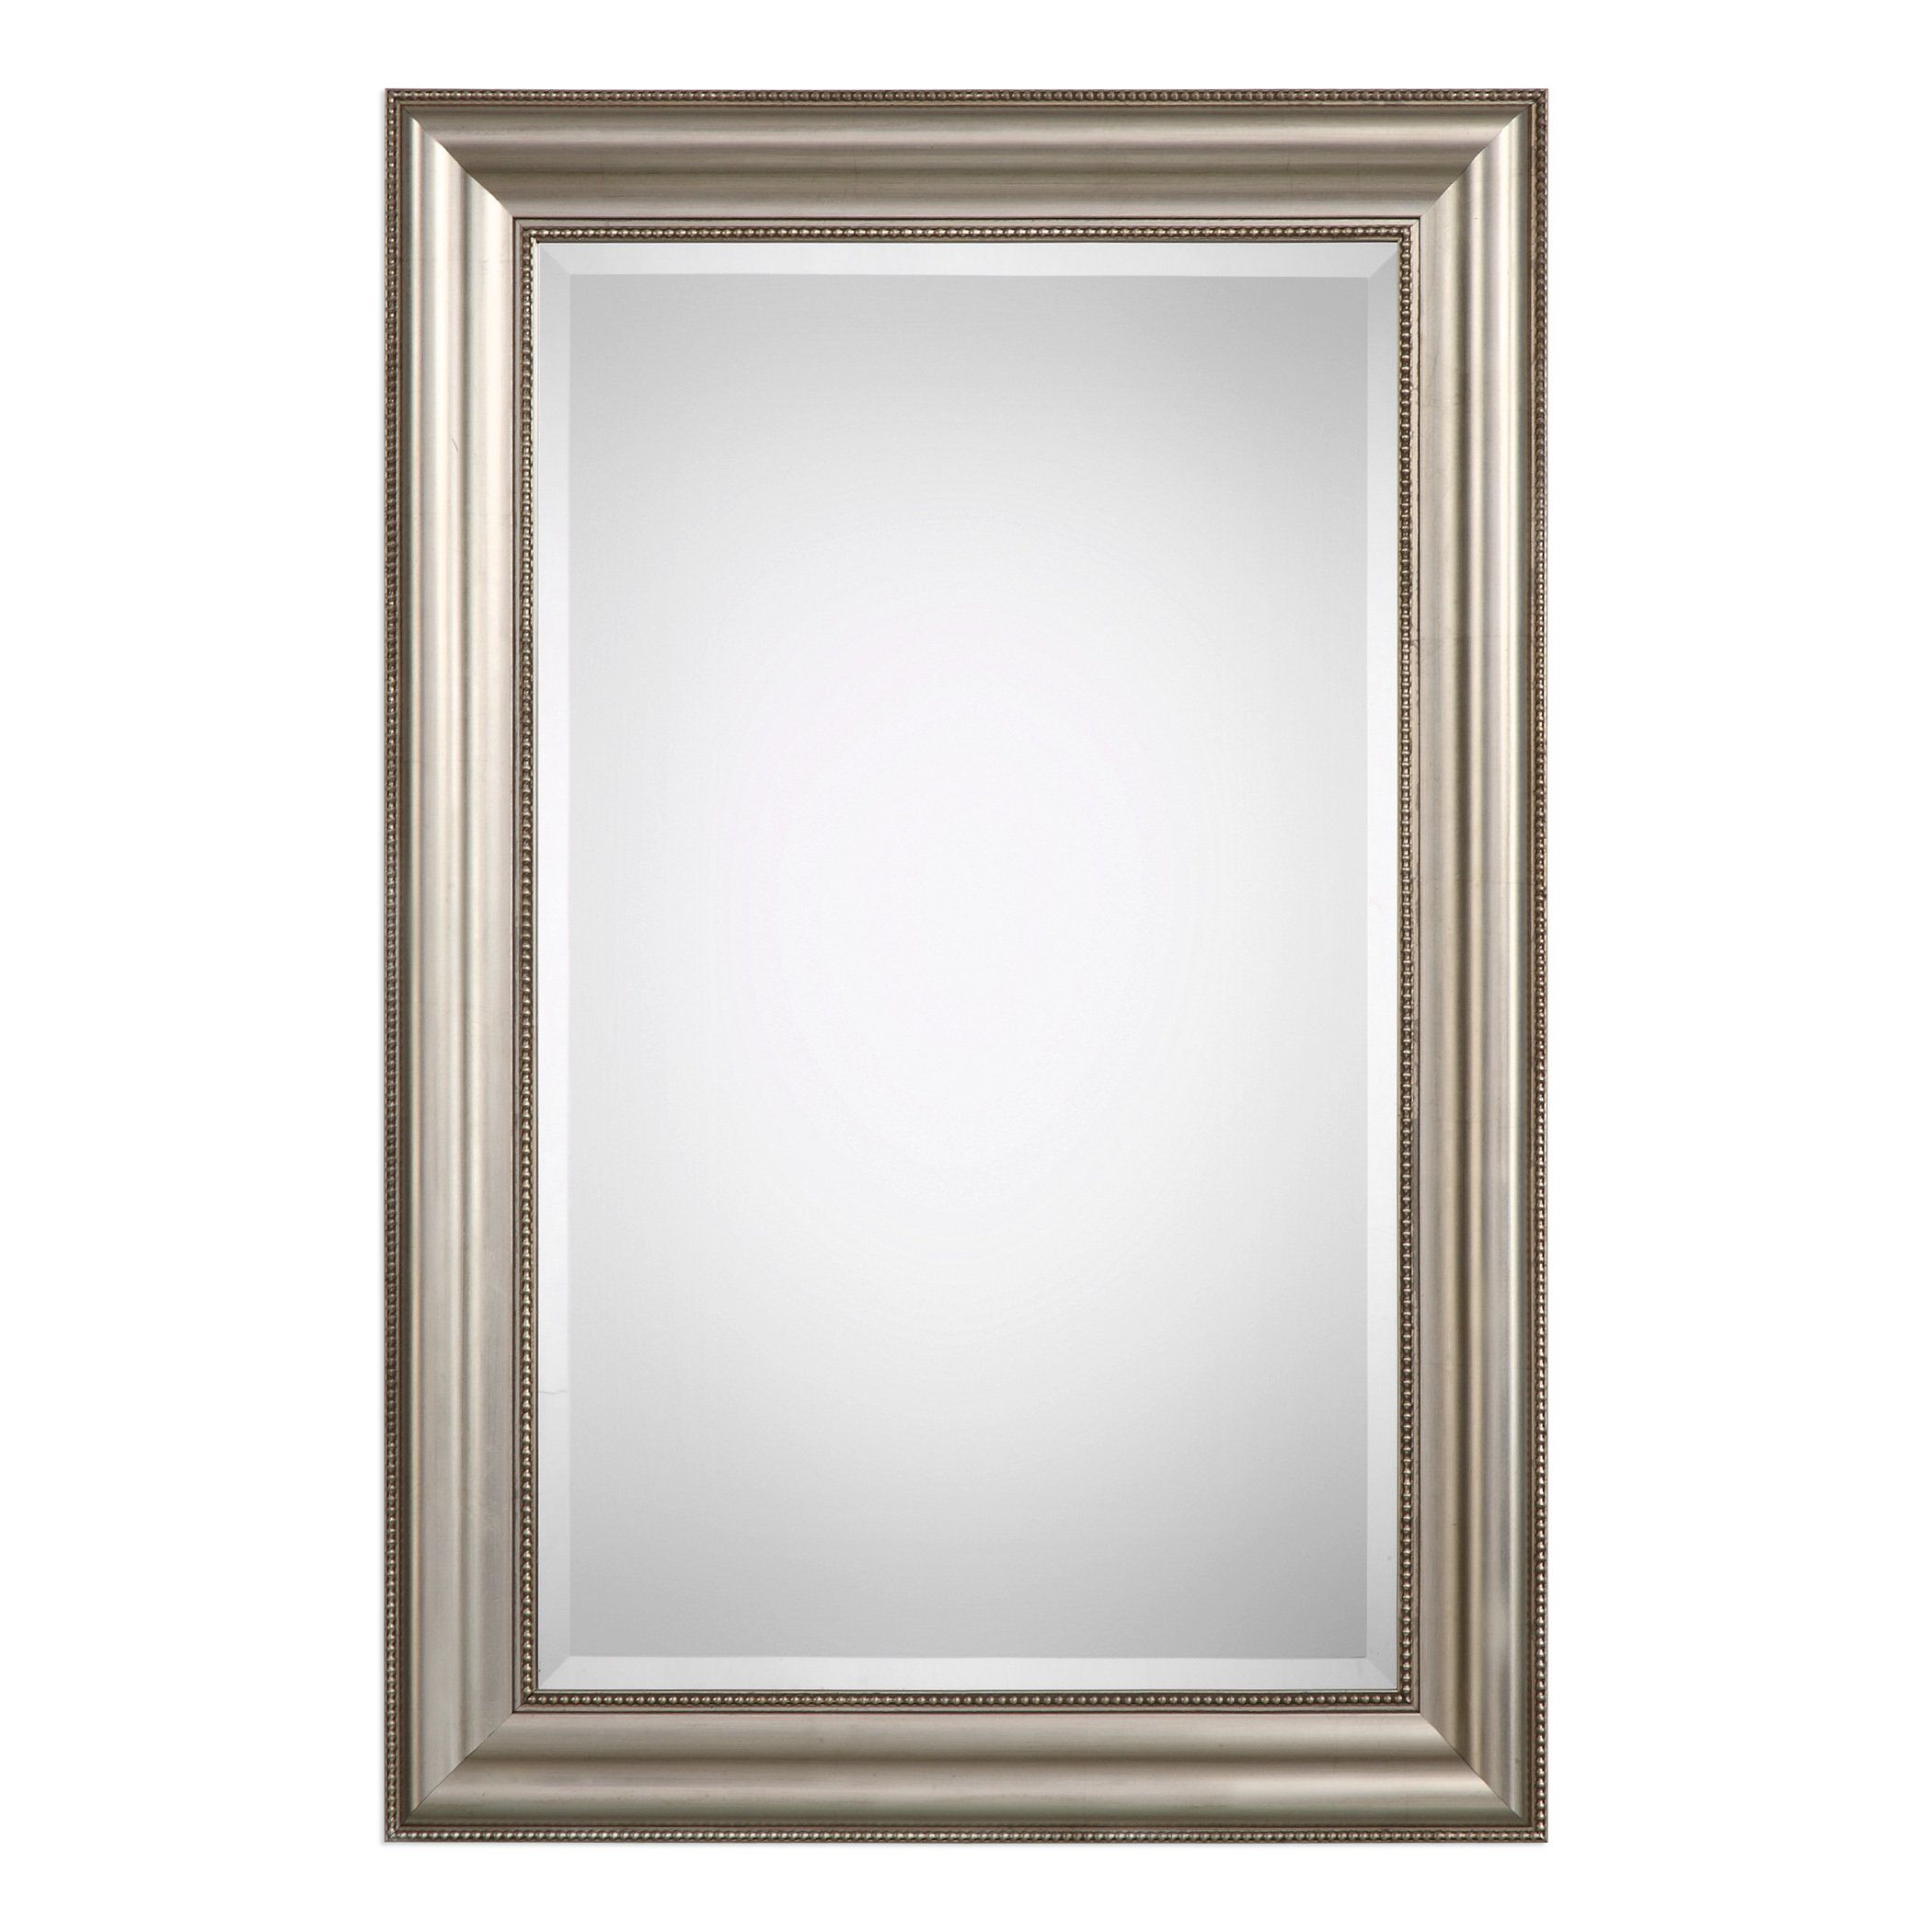 Farmhouse Mirrors | Birch Lane Inside Traditional Square Glass Wall Mirrors (Photo 6 of 30)